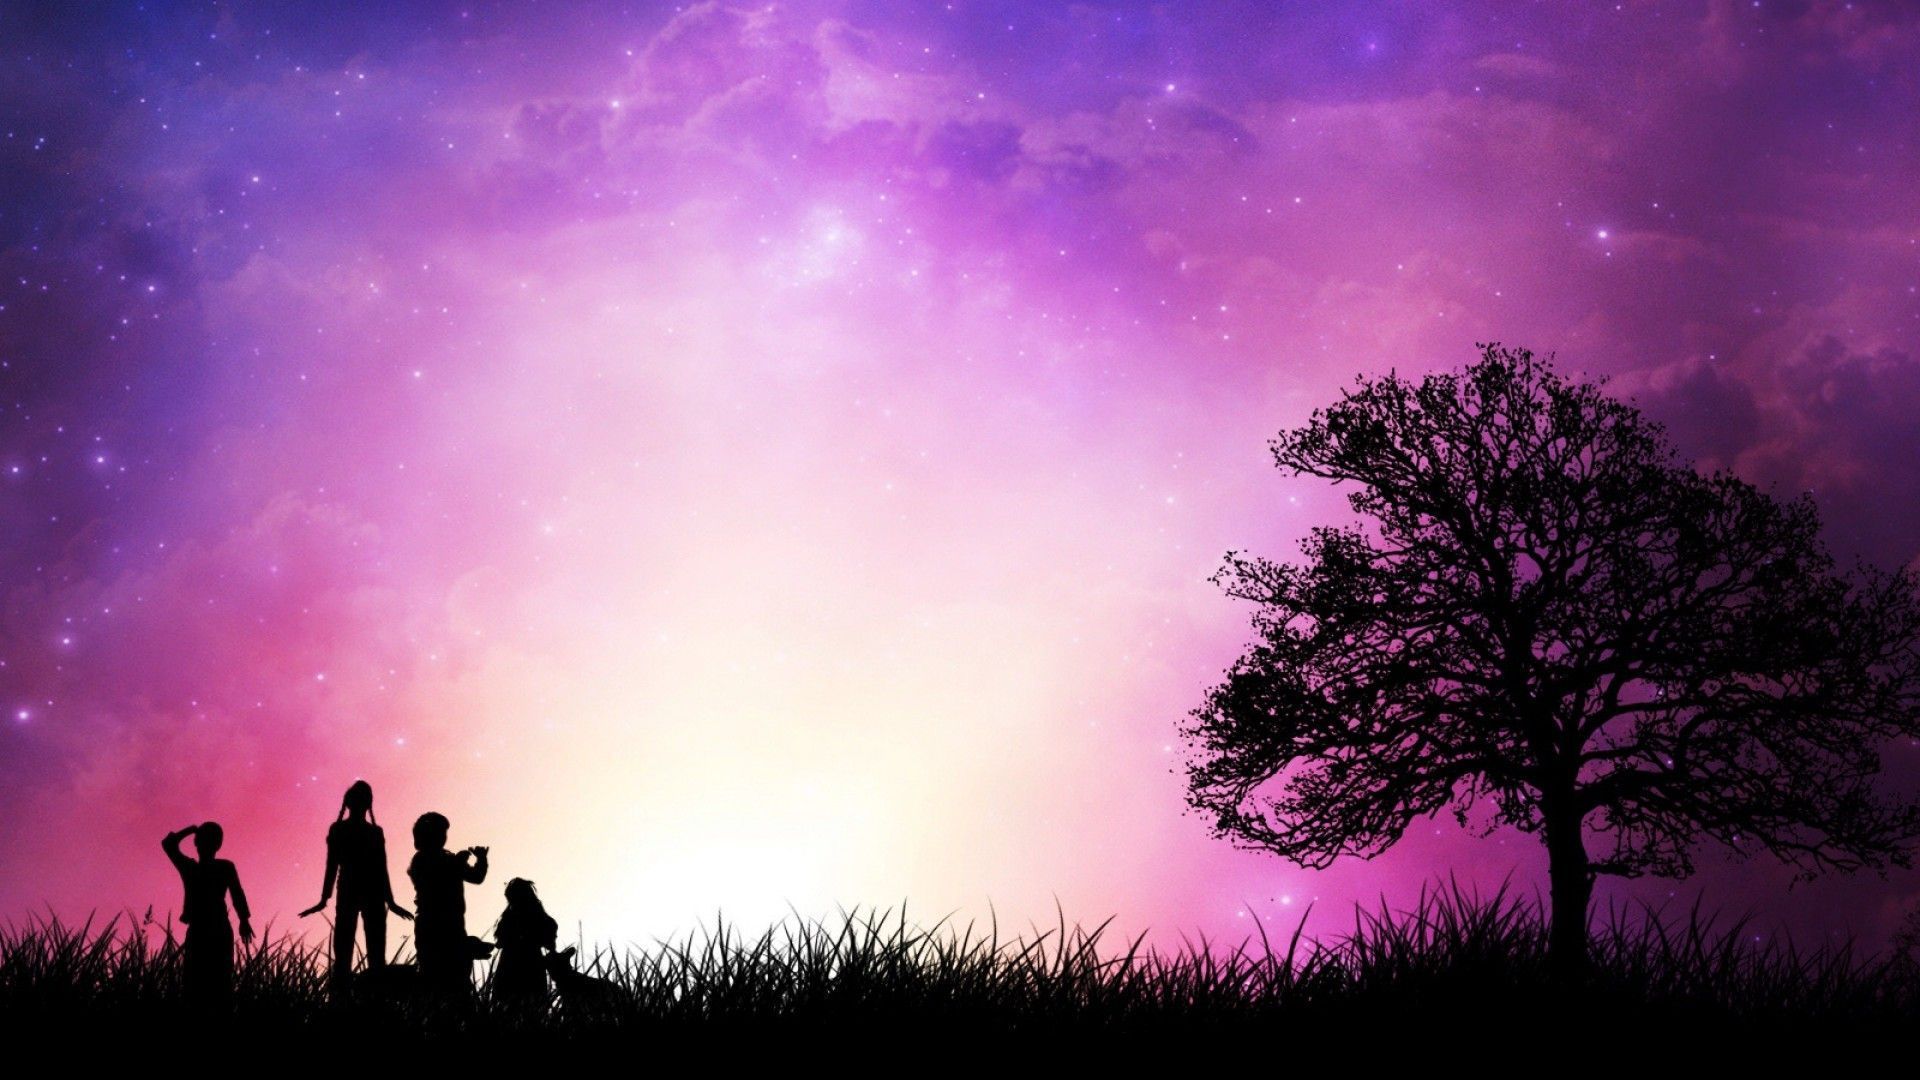 Star, childhood, romantic, background | HD Wallpapers